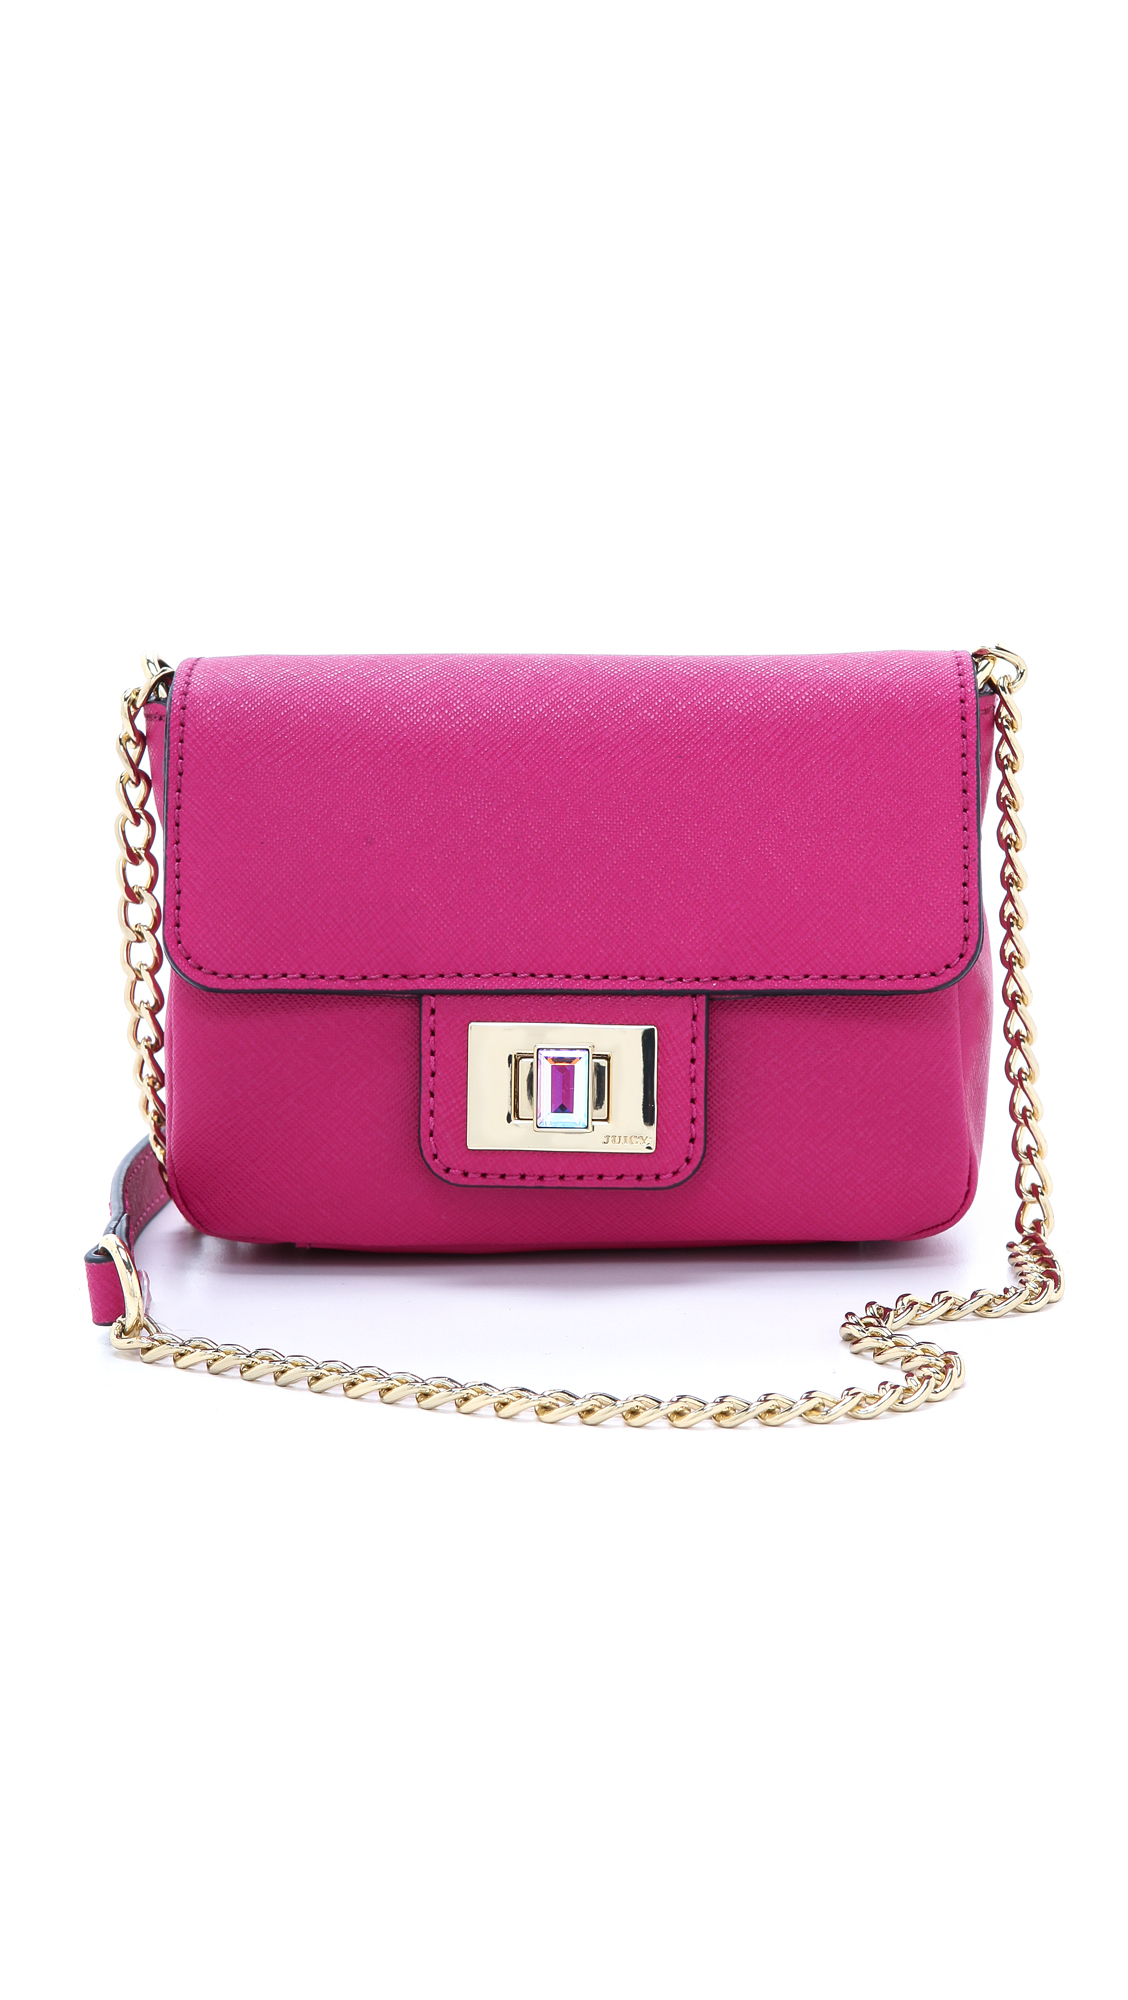 Lyst - Juicy Couture Sophia Collection Mini Bag in Pink